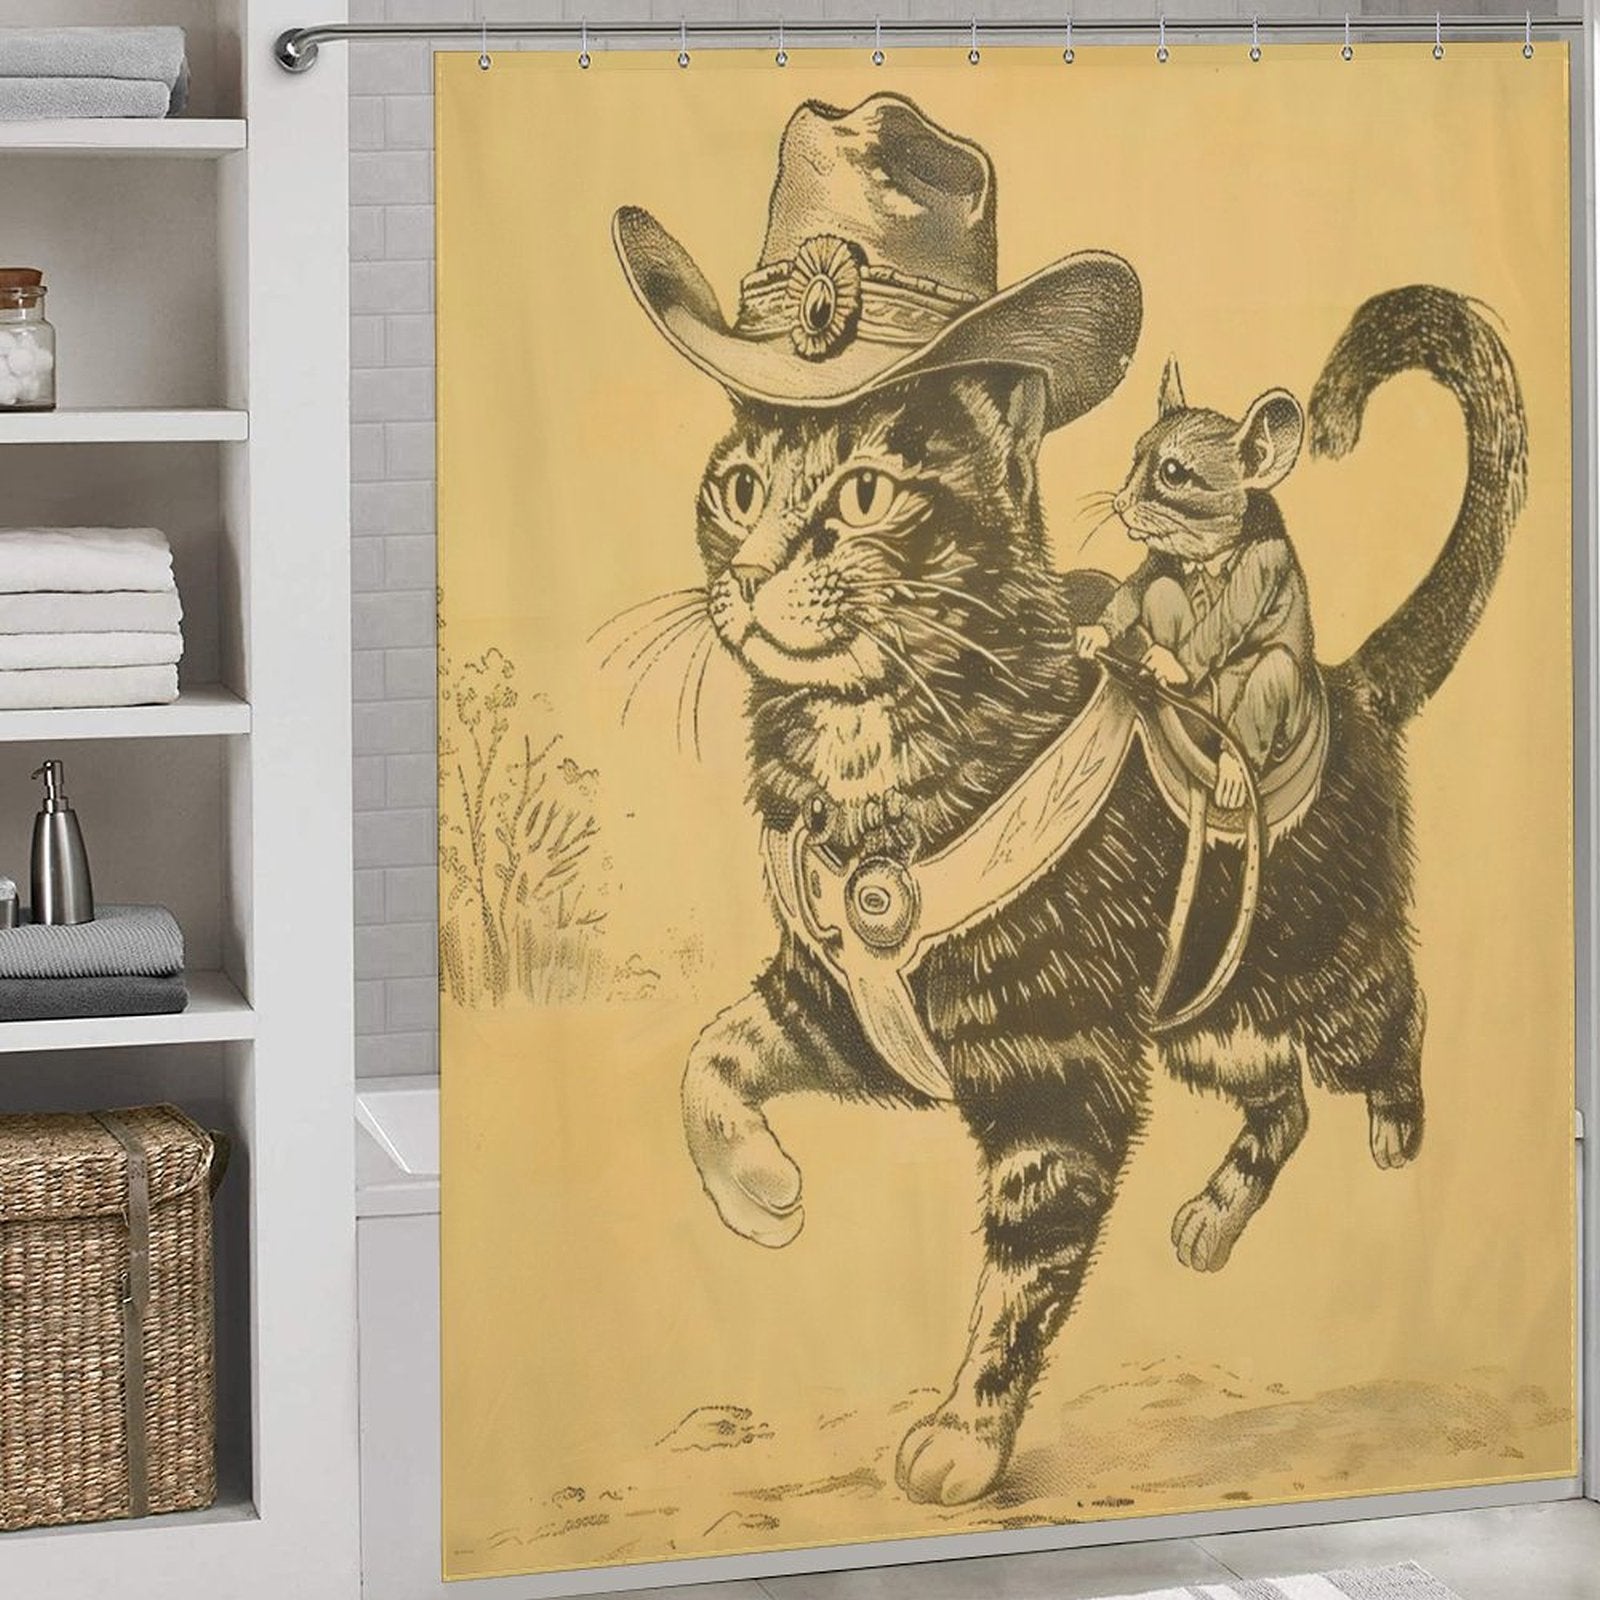 A Funny Cool Mouse Riding Cat Shower Curtain Shower Curtain-Cottoncat by Cotton Cat features a drawing of a cat dressed as a cowboy with a hat and saddle, carrying a similarly attired rodent on its back. This whimsical bathroom decor, displayed amidst shelves and towels, is both waterproof and mildew-resistant.